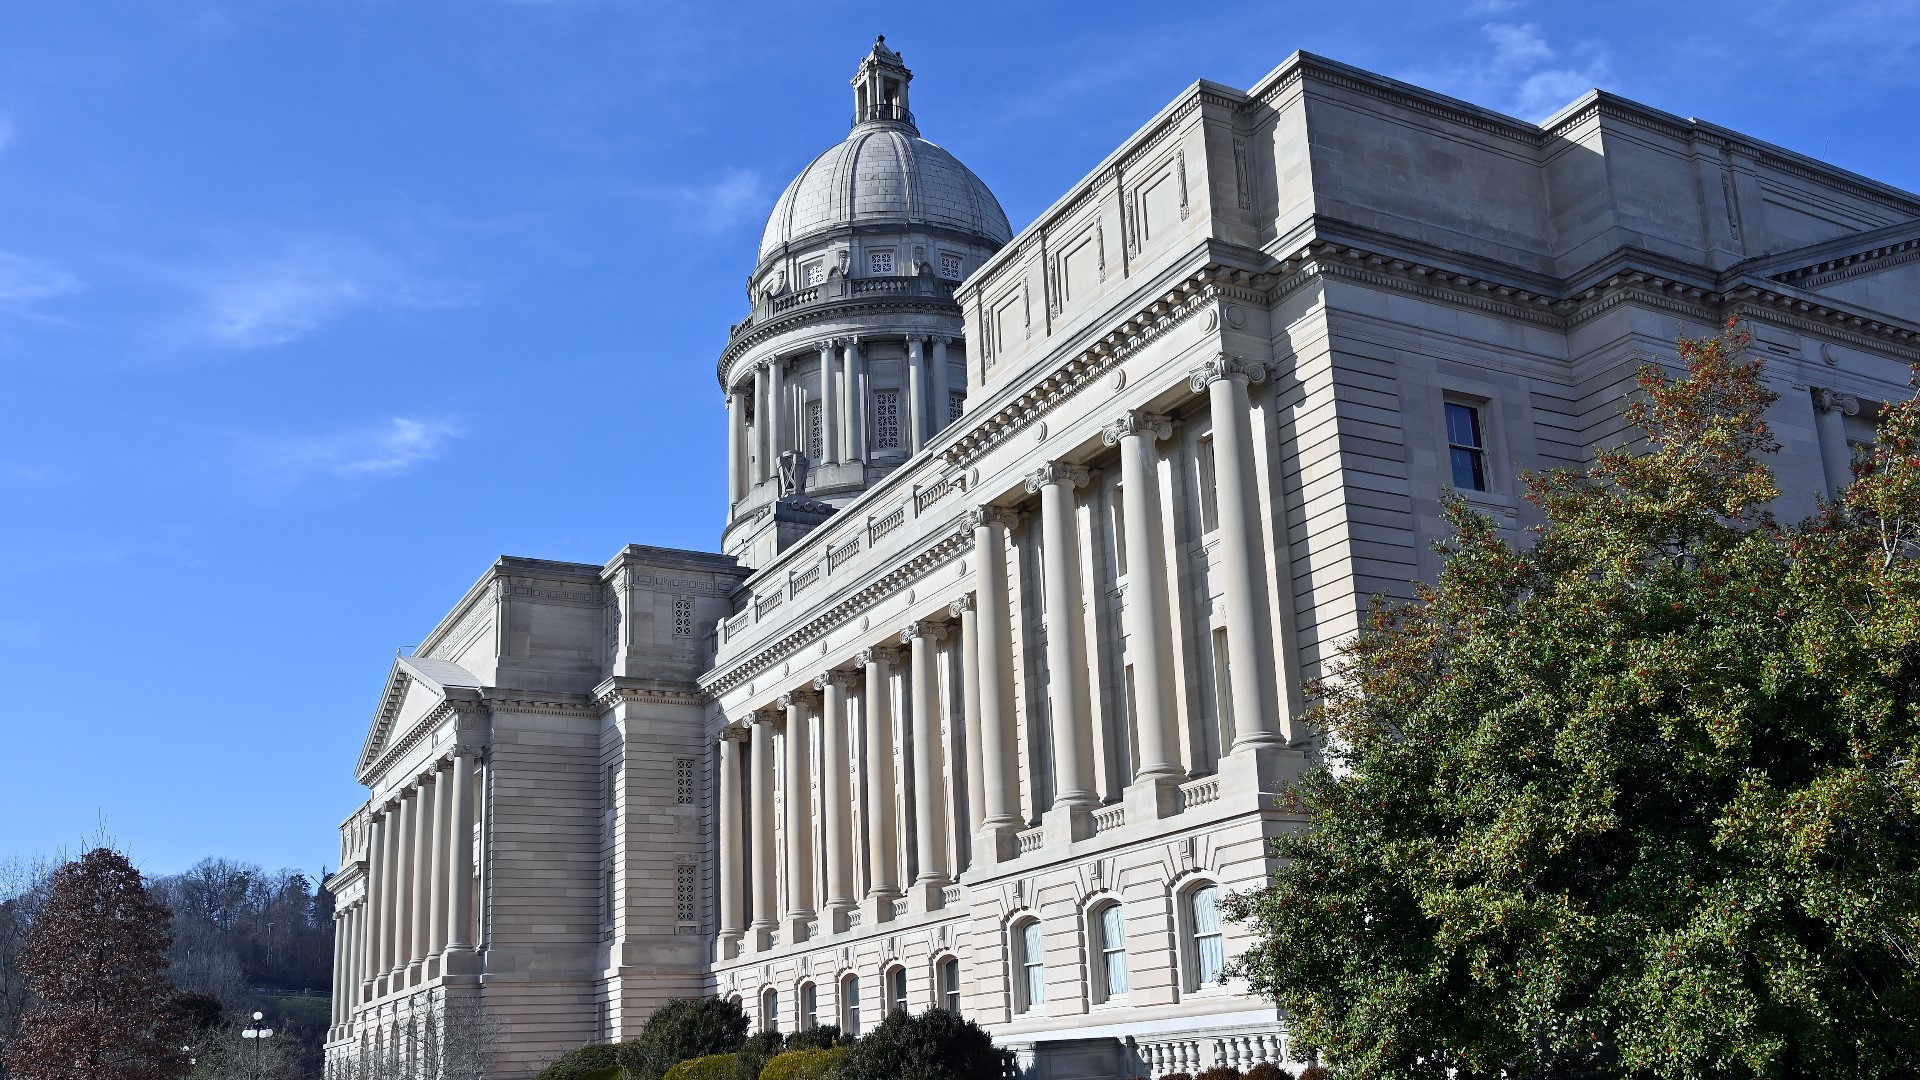 Legislators will return to Frankfort on April 12 when the veto period ends where they'll have a chance to vote to override any of the governor's vetoes.